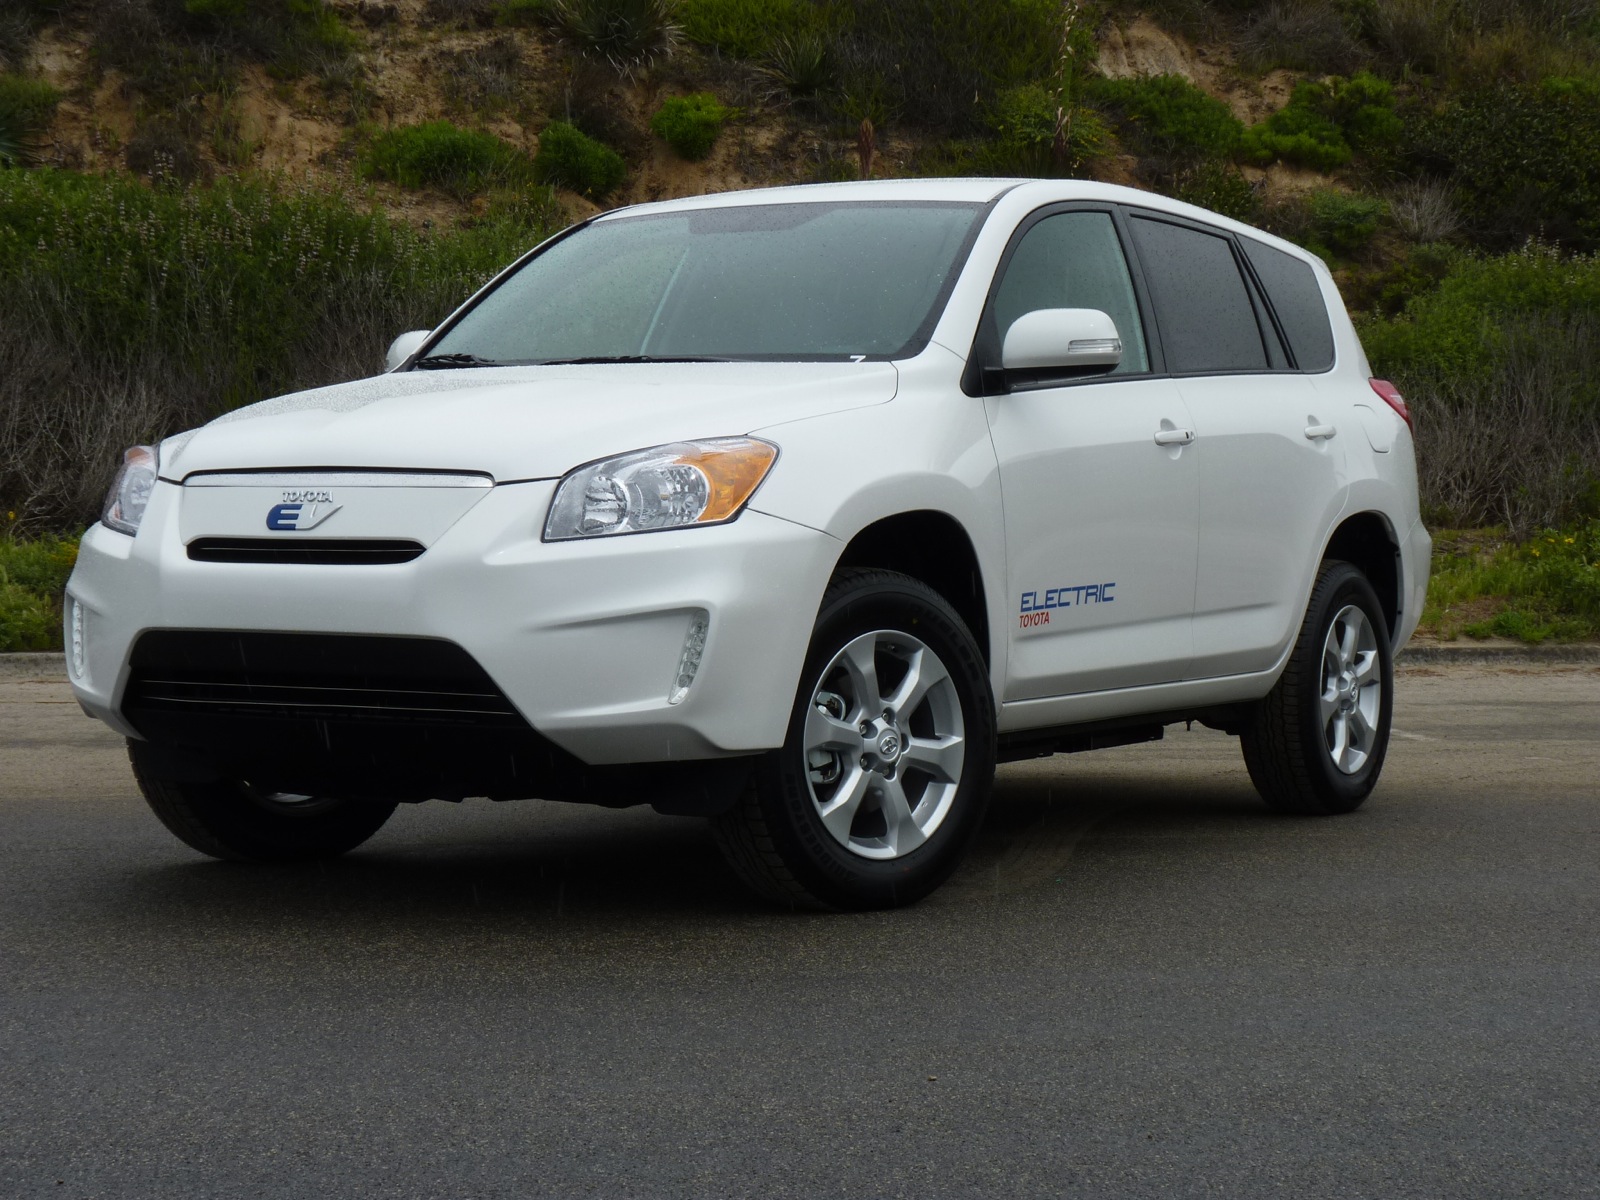 Toyota: No Plans For Quick Charging In RAV4 EV